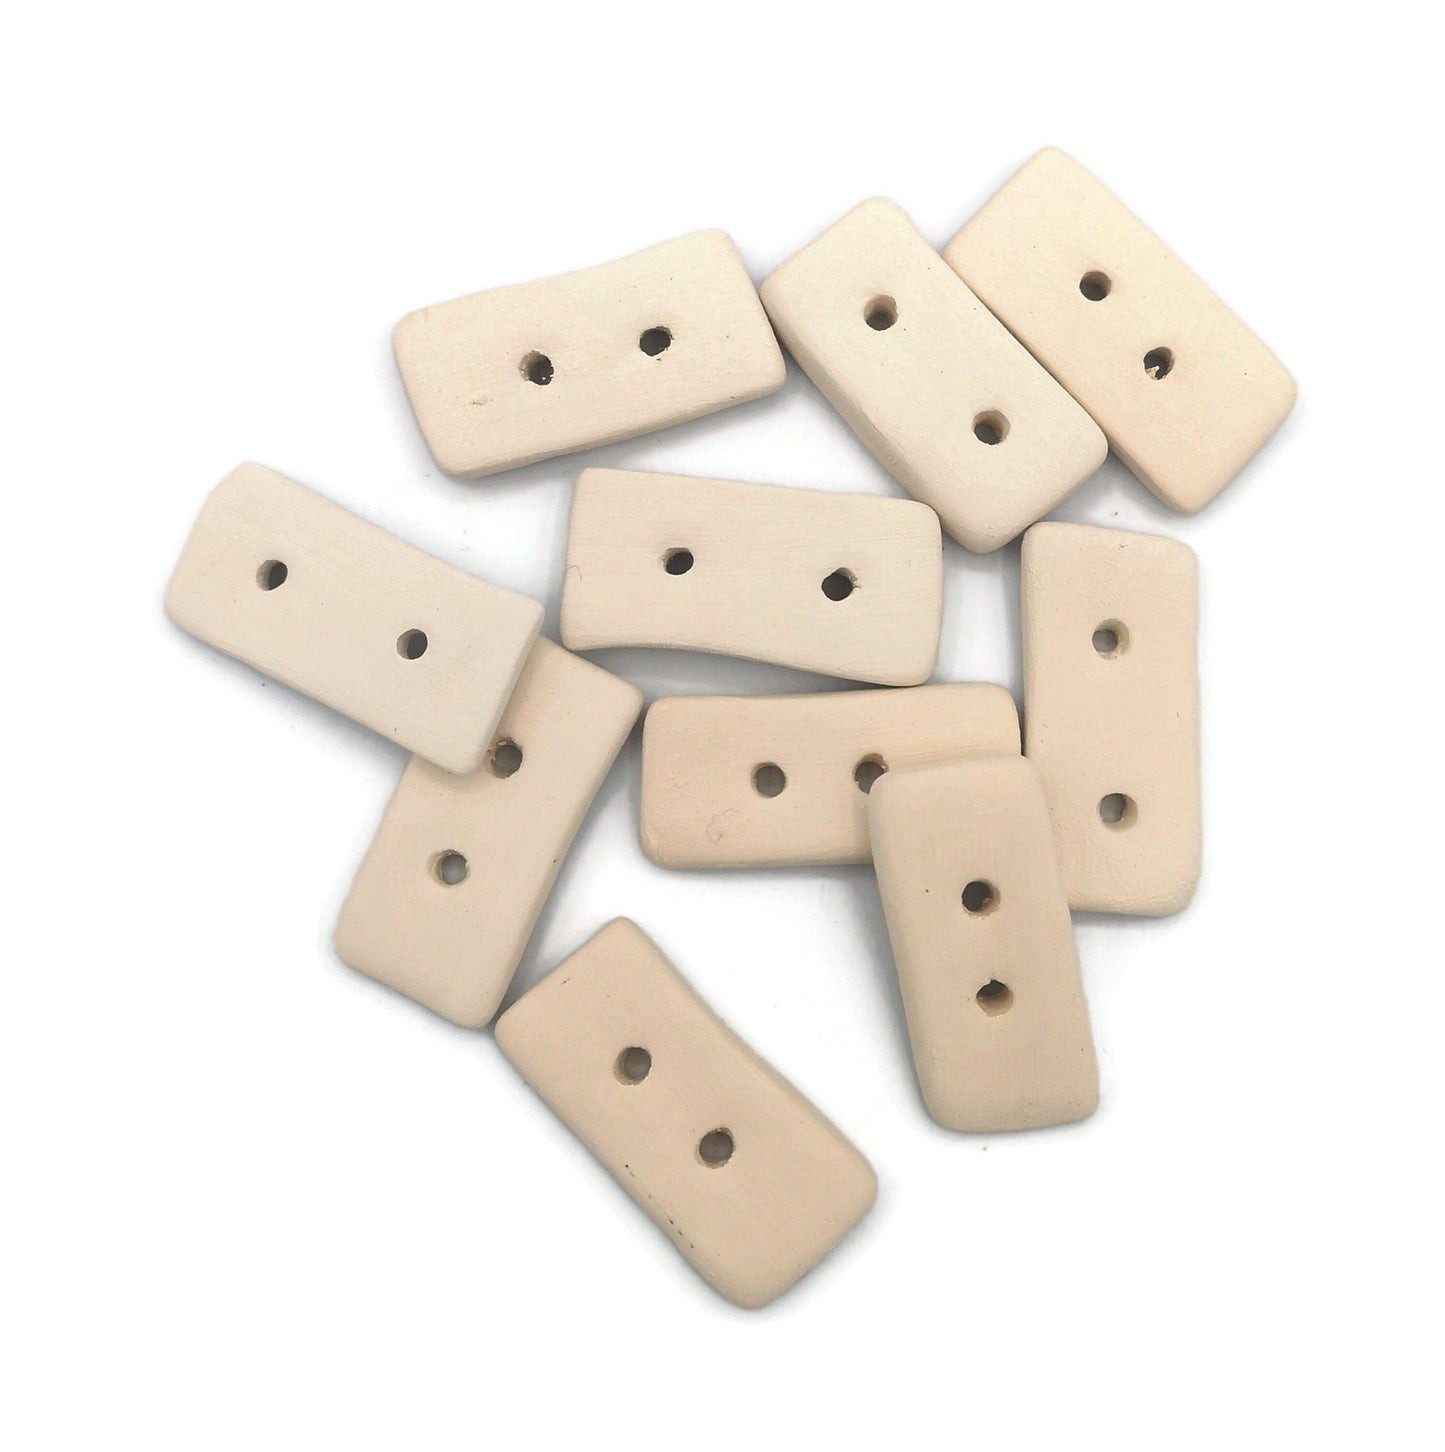 10Pcs Handmade Ceramic Bisque Buttons Ready To Paint, Artisan Blank Rectangle Shaped Sewing Buttons, Diy Craft Kit Gifts For Adults - Ceramica Ana Rafael